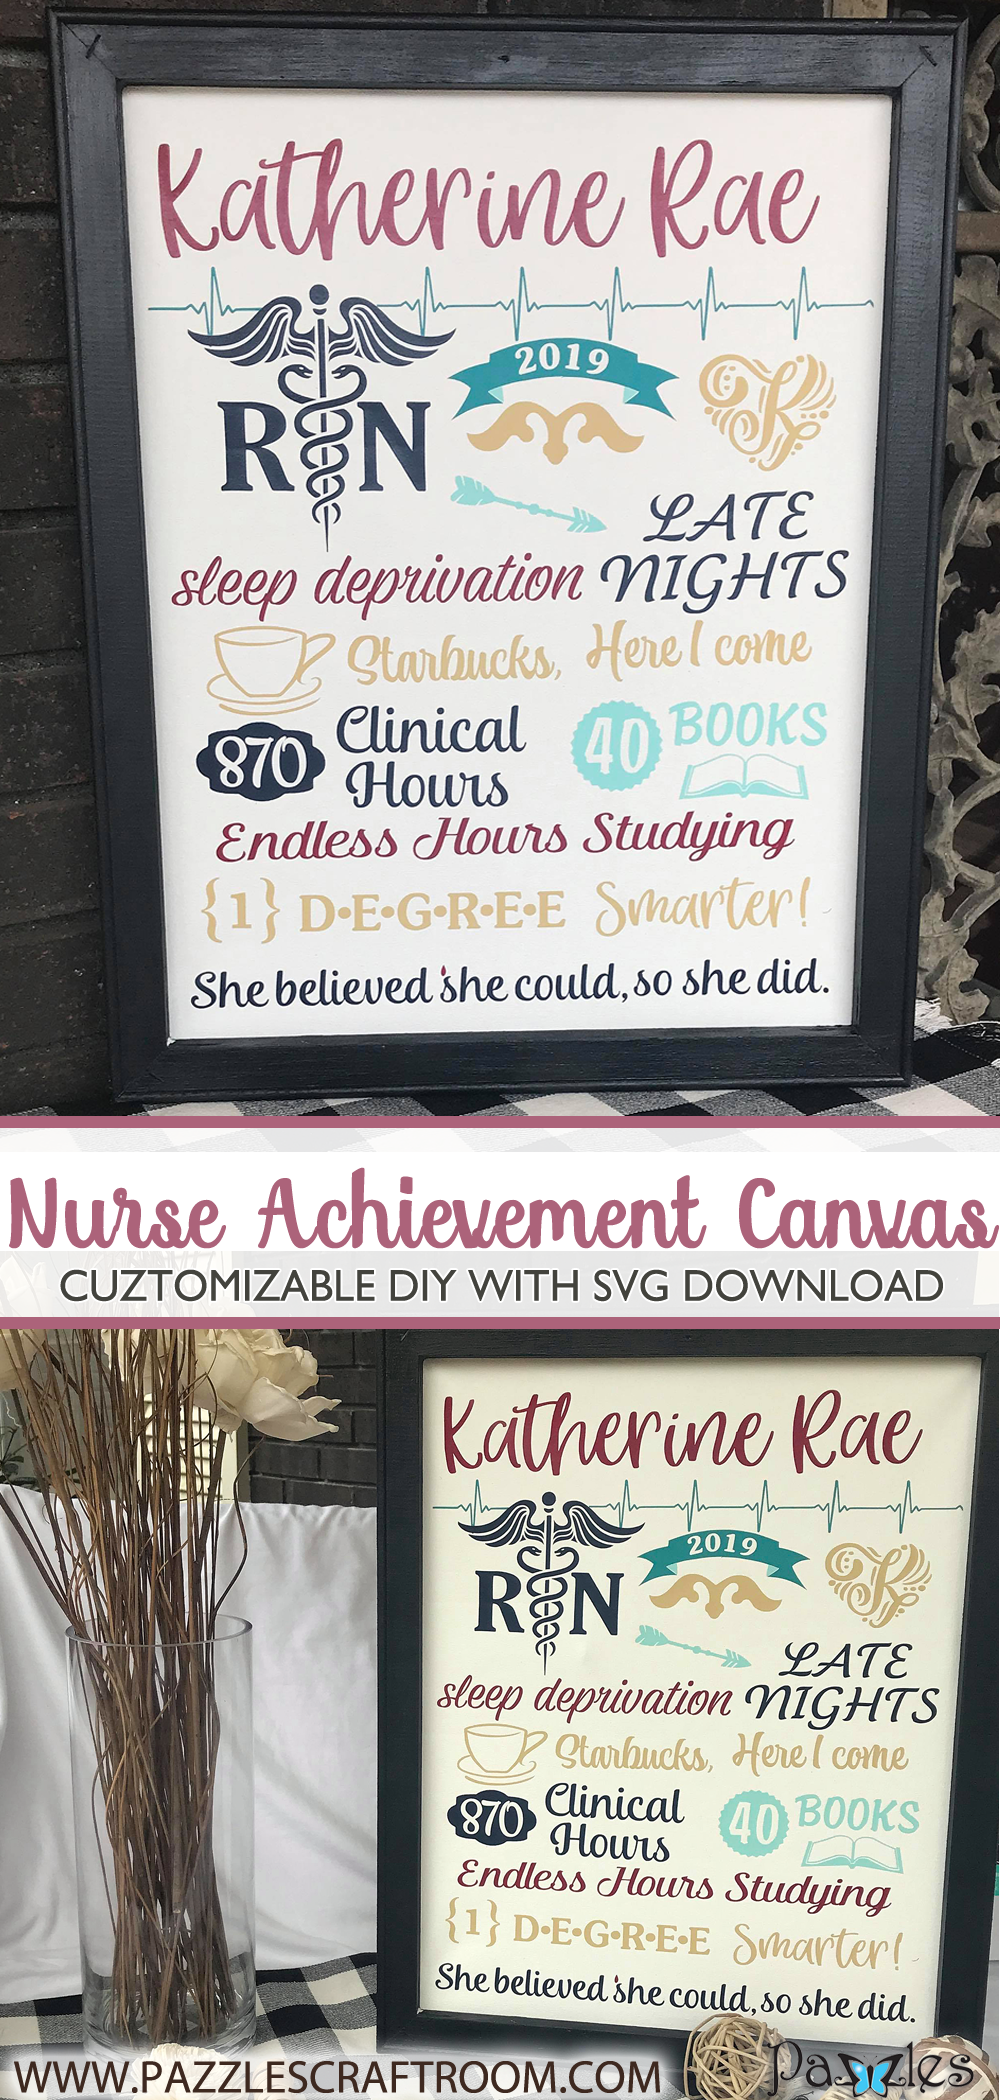 Pazzles DIY Nurse Achievement Canvas and Digital Burlap Alphabet set. SVG instant download compatible with all major electronic cutters including Pazzles Inspiration, Cricut, and Silhouette Cameo. Design by Leslie Peppers.